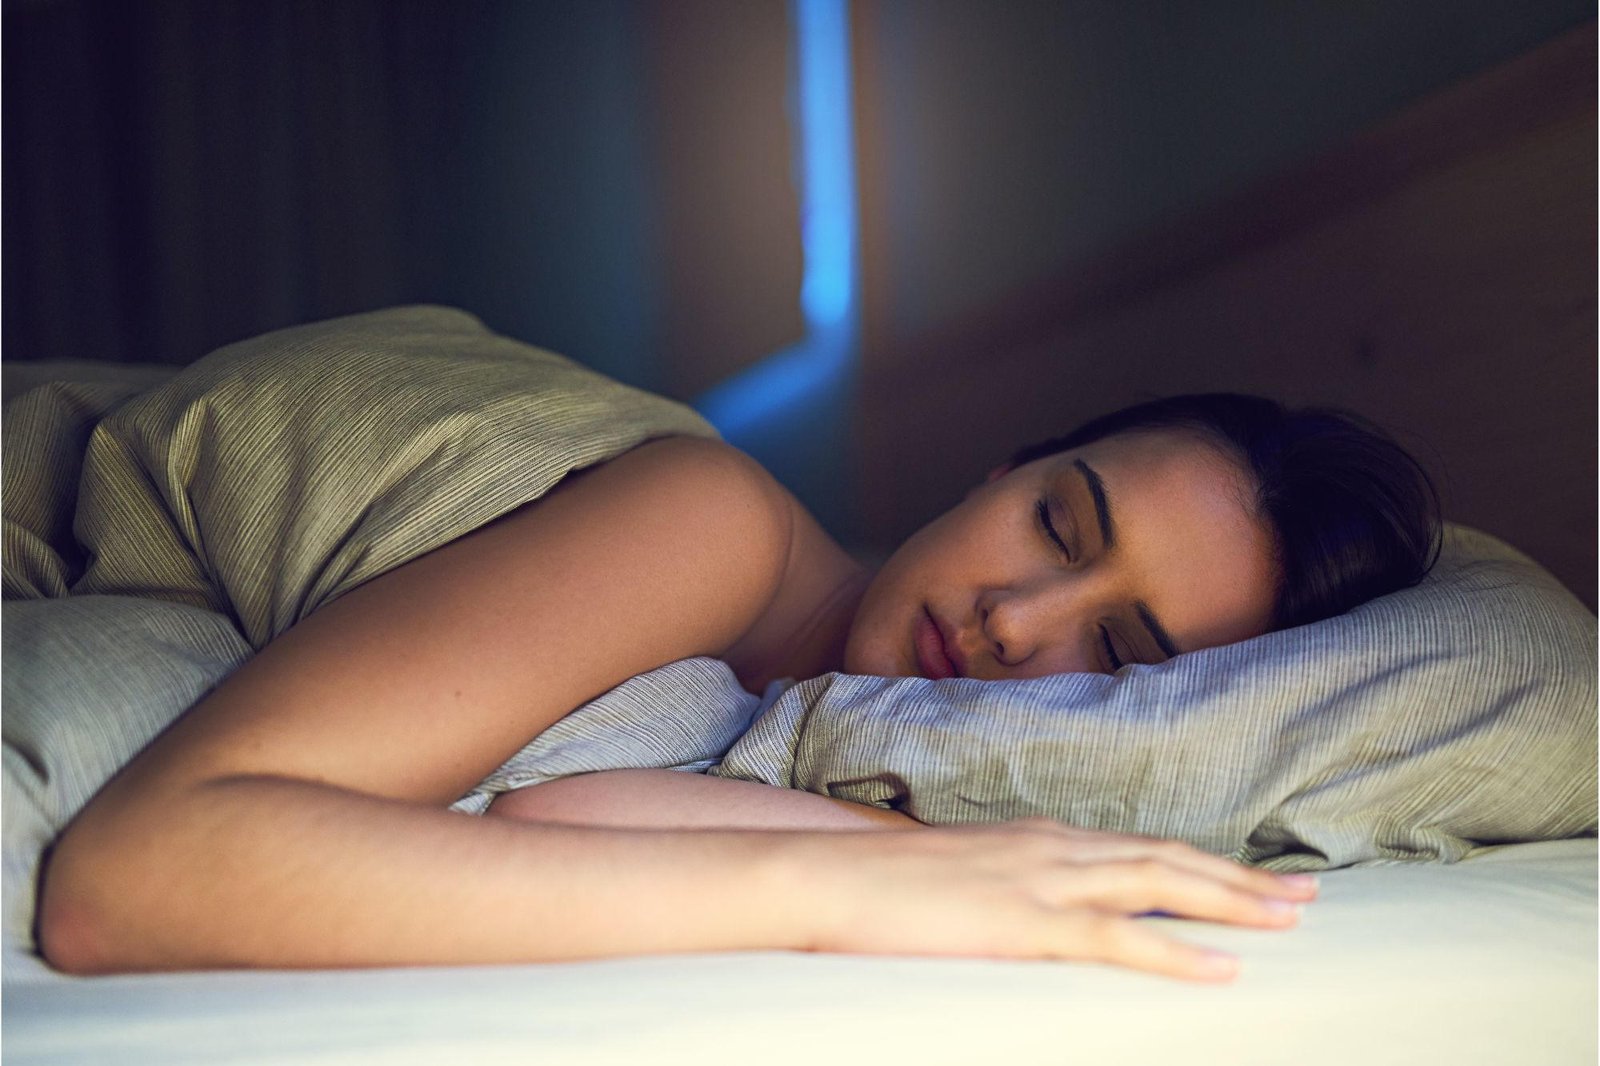 Can Sleeping Better Mean Studying Less? New Research Uncovers Surprising Impact of Sleep on Learning